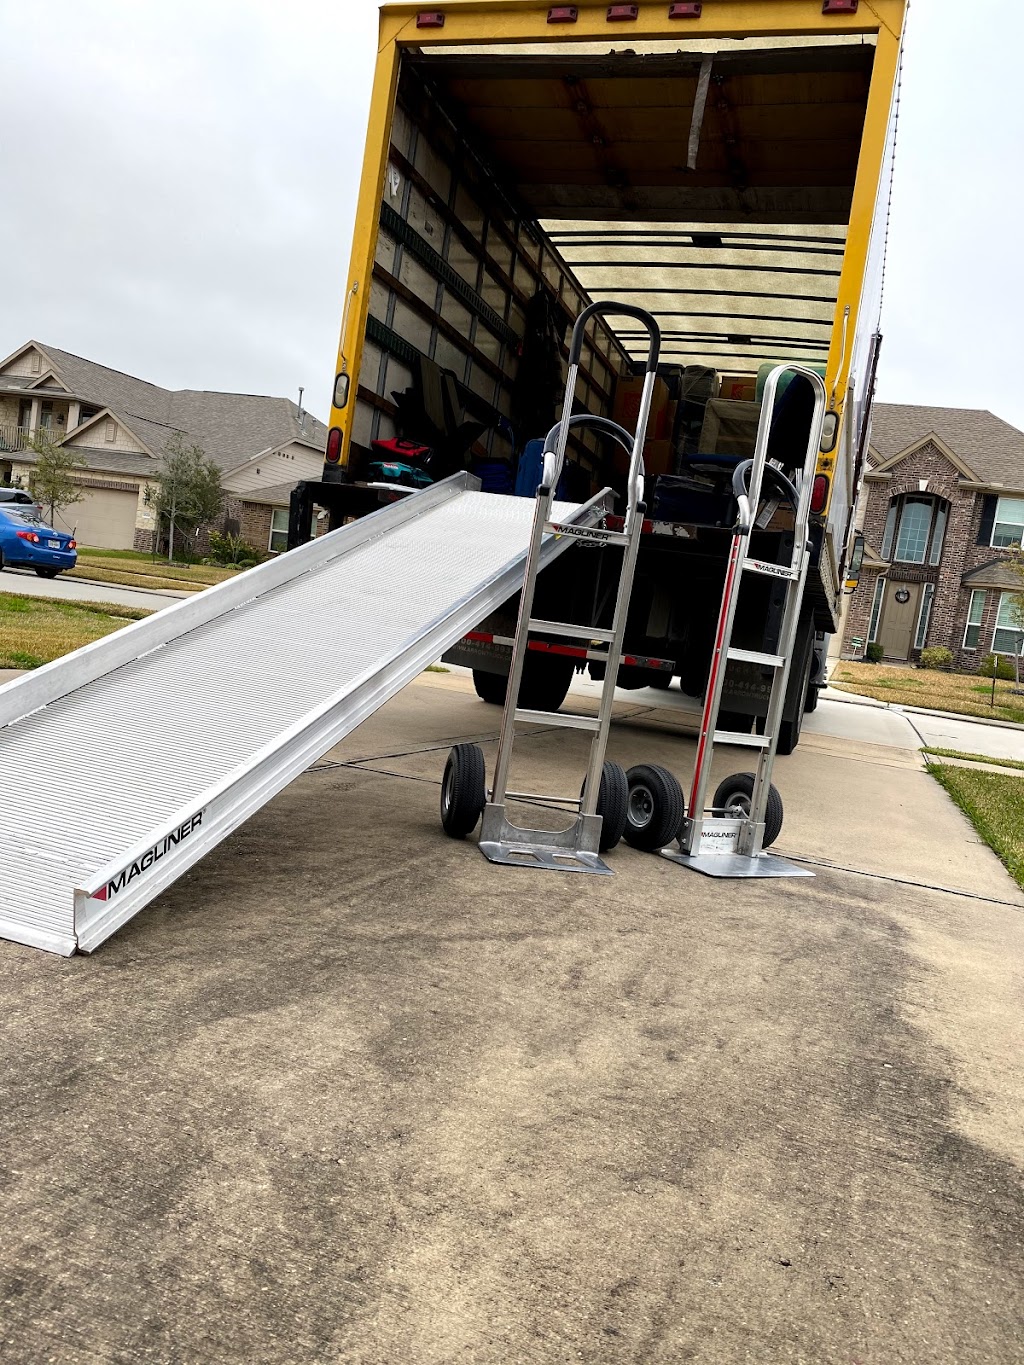 Pads & Dollies Moving | 4014 Flowstone Ln, Round Rock, TX 78681, USA | Phone: (512) 297-5770